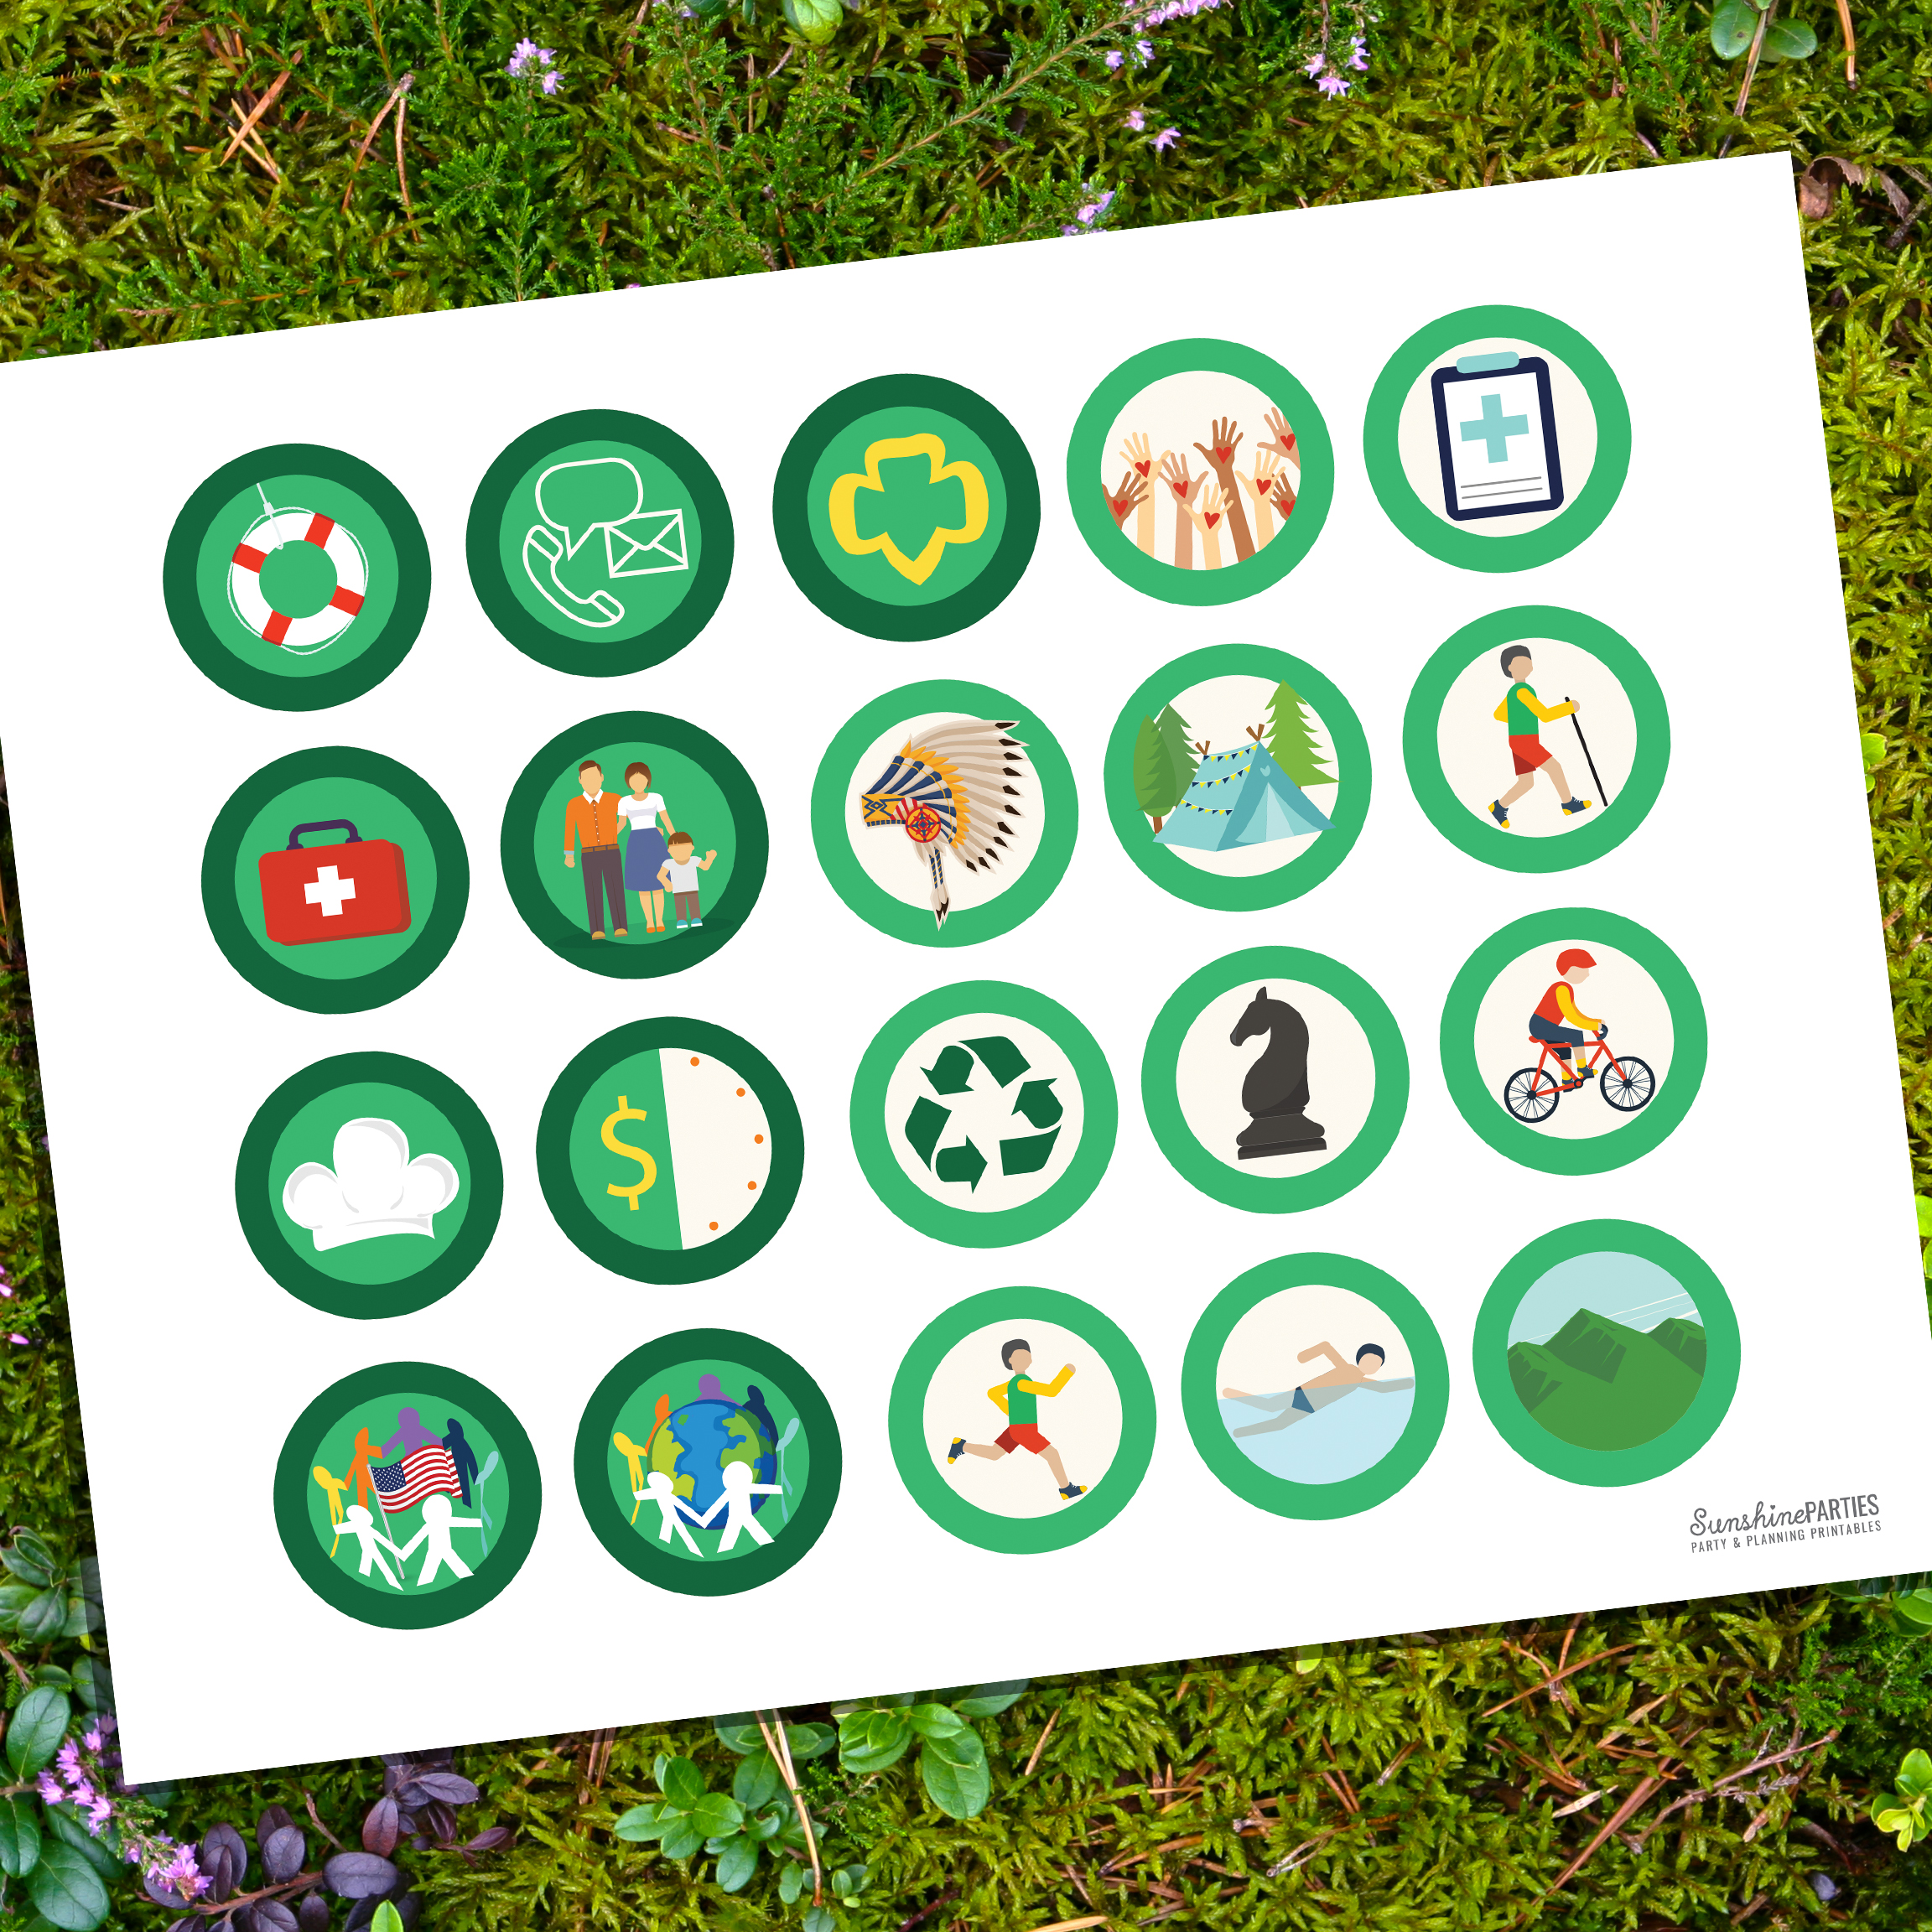 Boy scouts and cubs merit badges - instant download to create your own pin badge! 